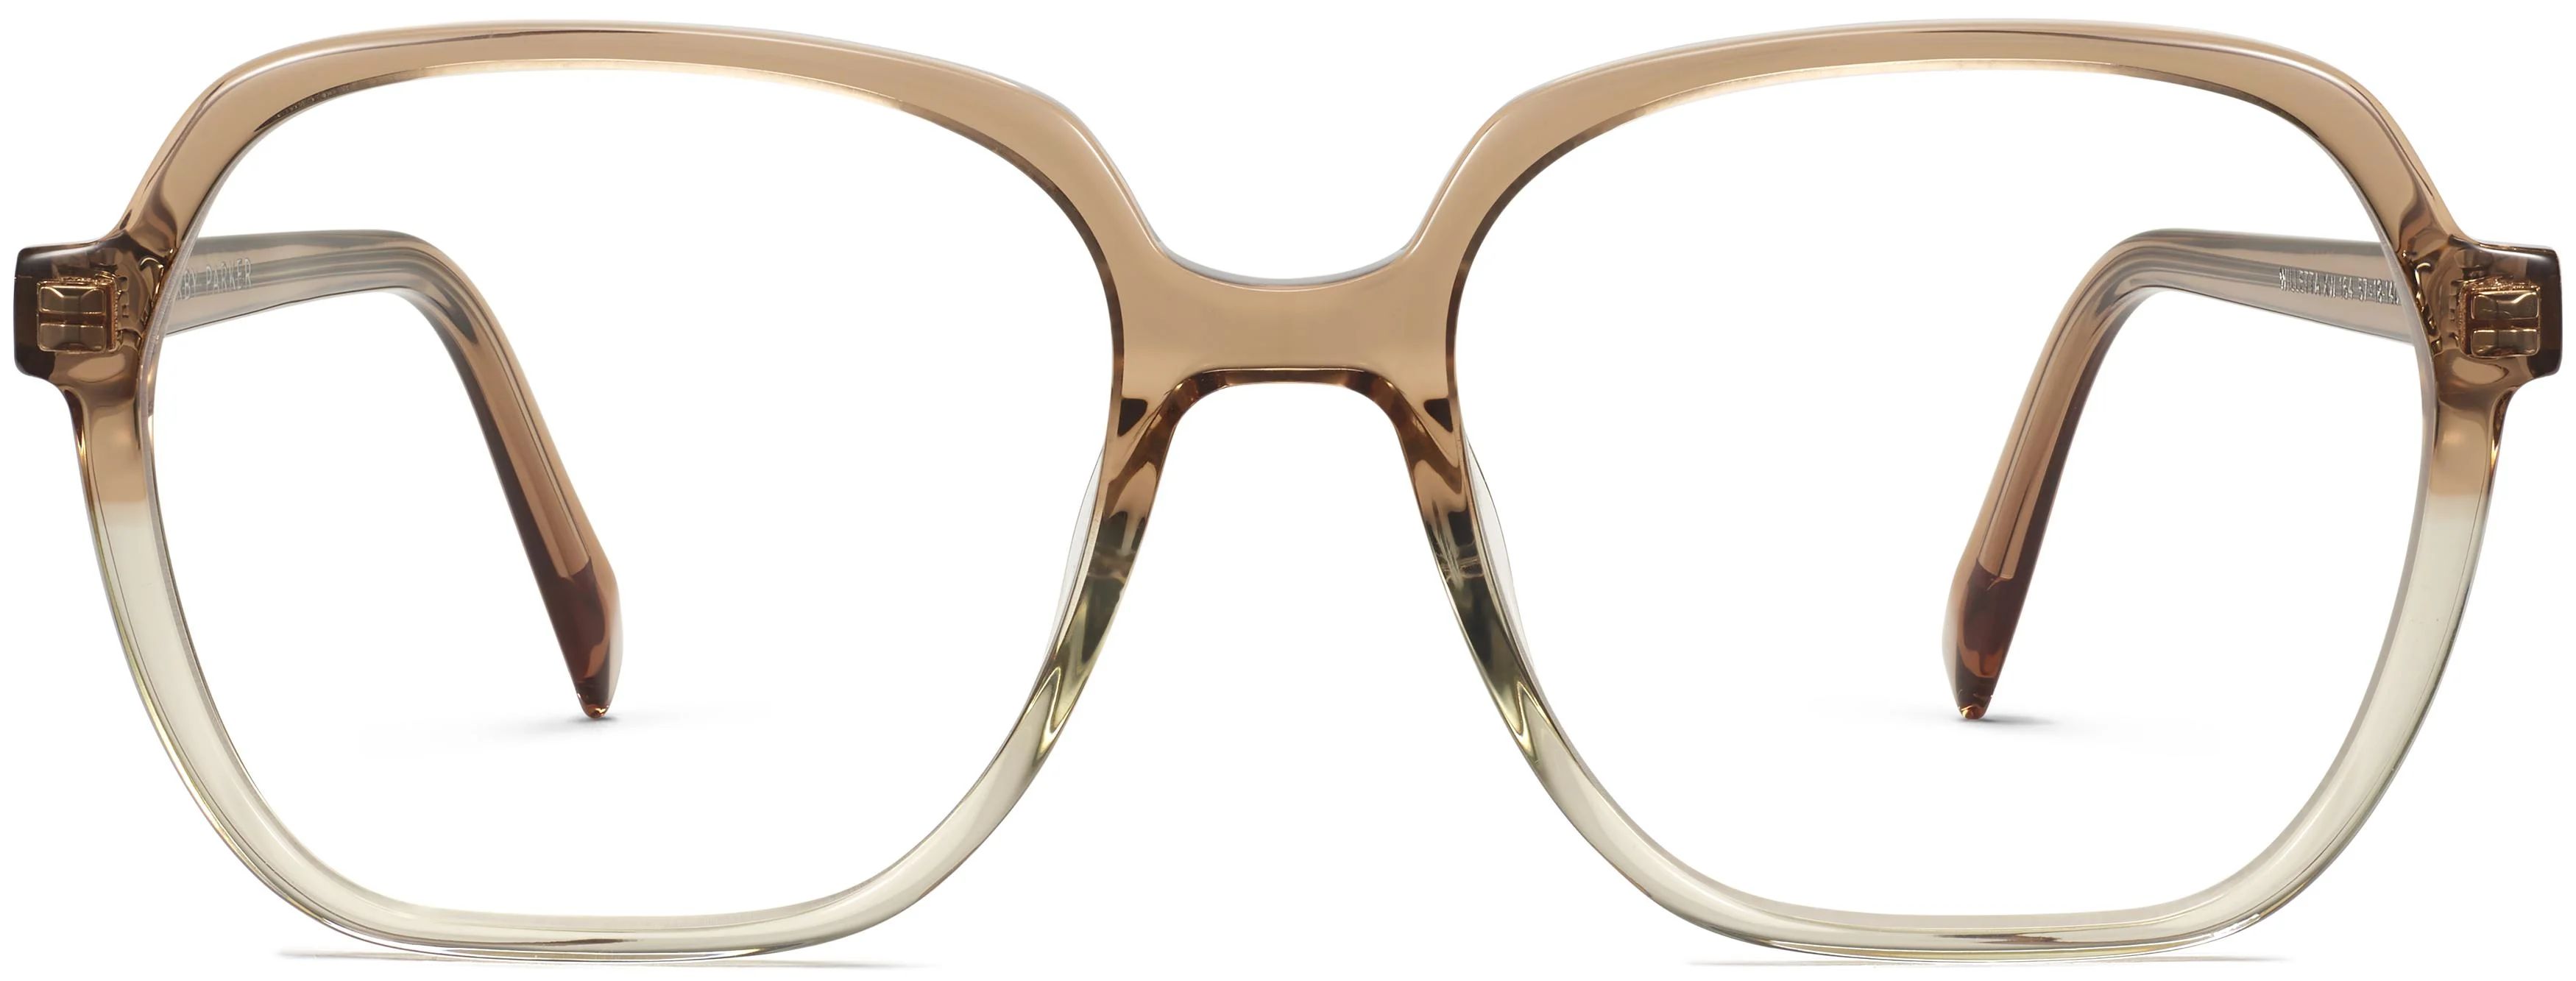 Willetta Eyeglasses in Chai Crystal Fade | Warby Parker | Warby Parker (US)